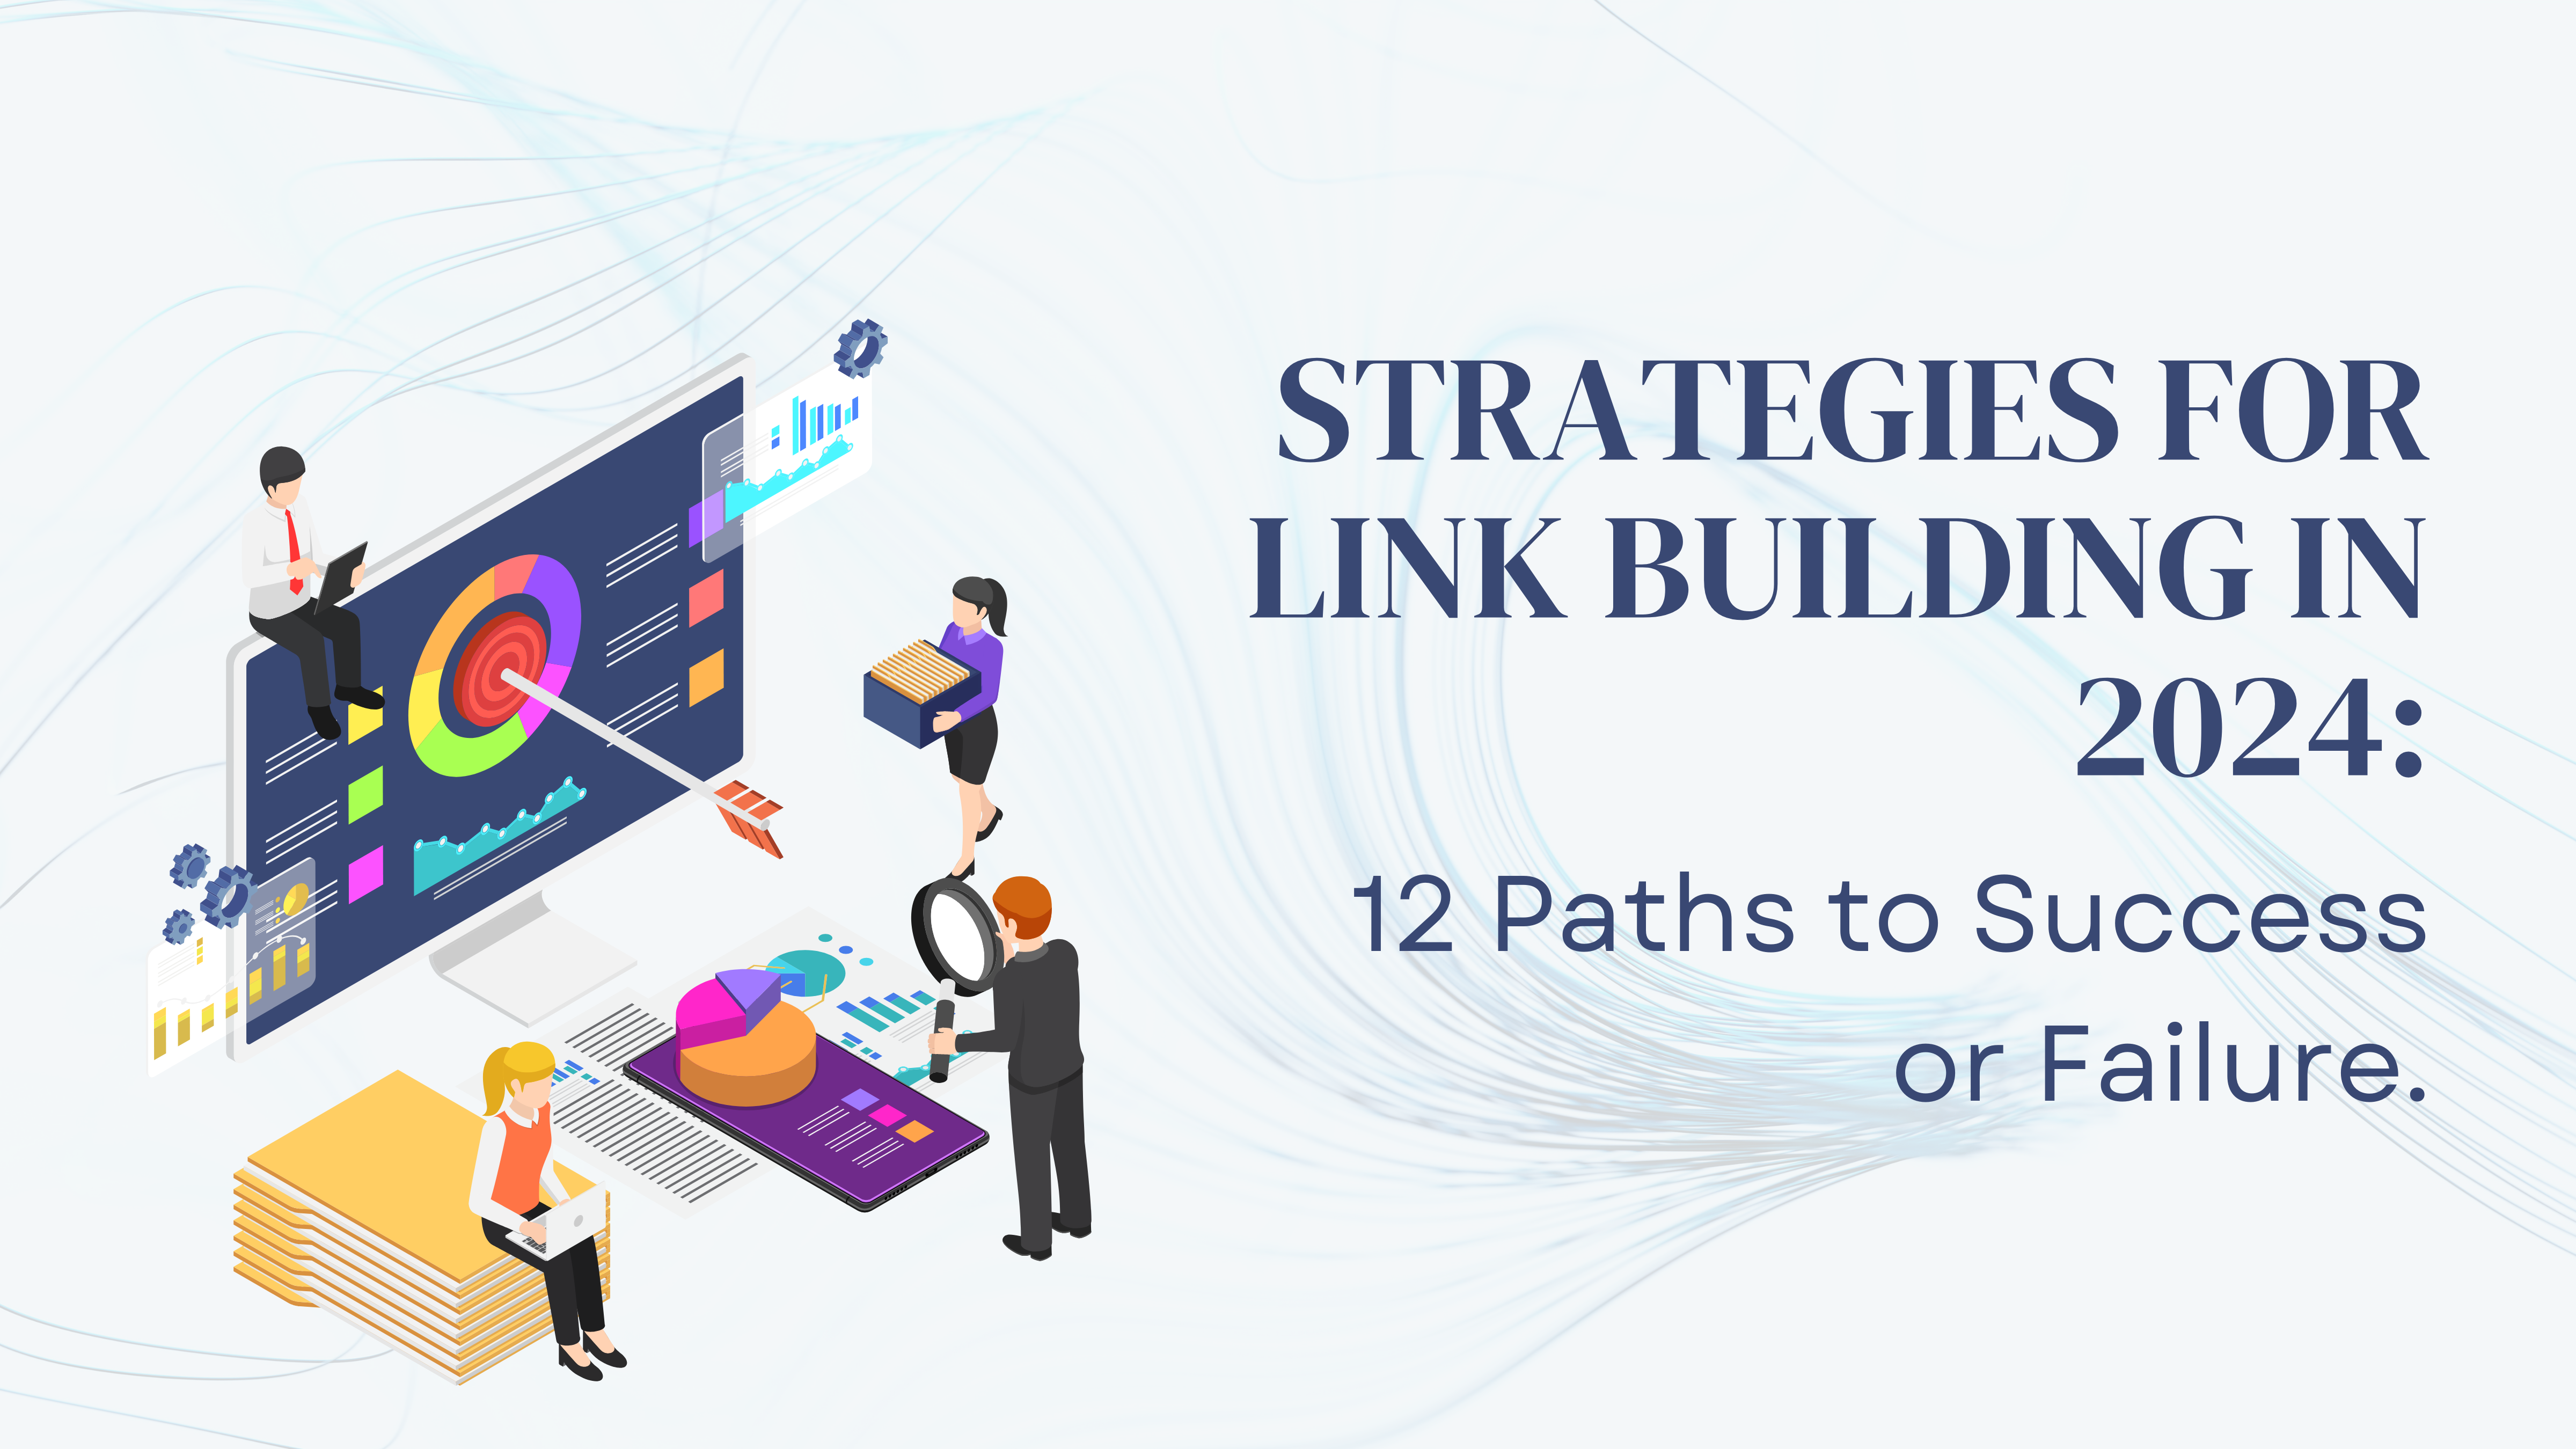 Link Building in 2024: 12 Ways to Win or Fail.